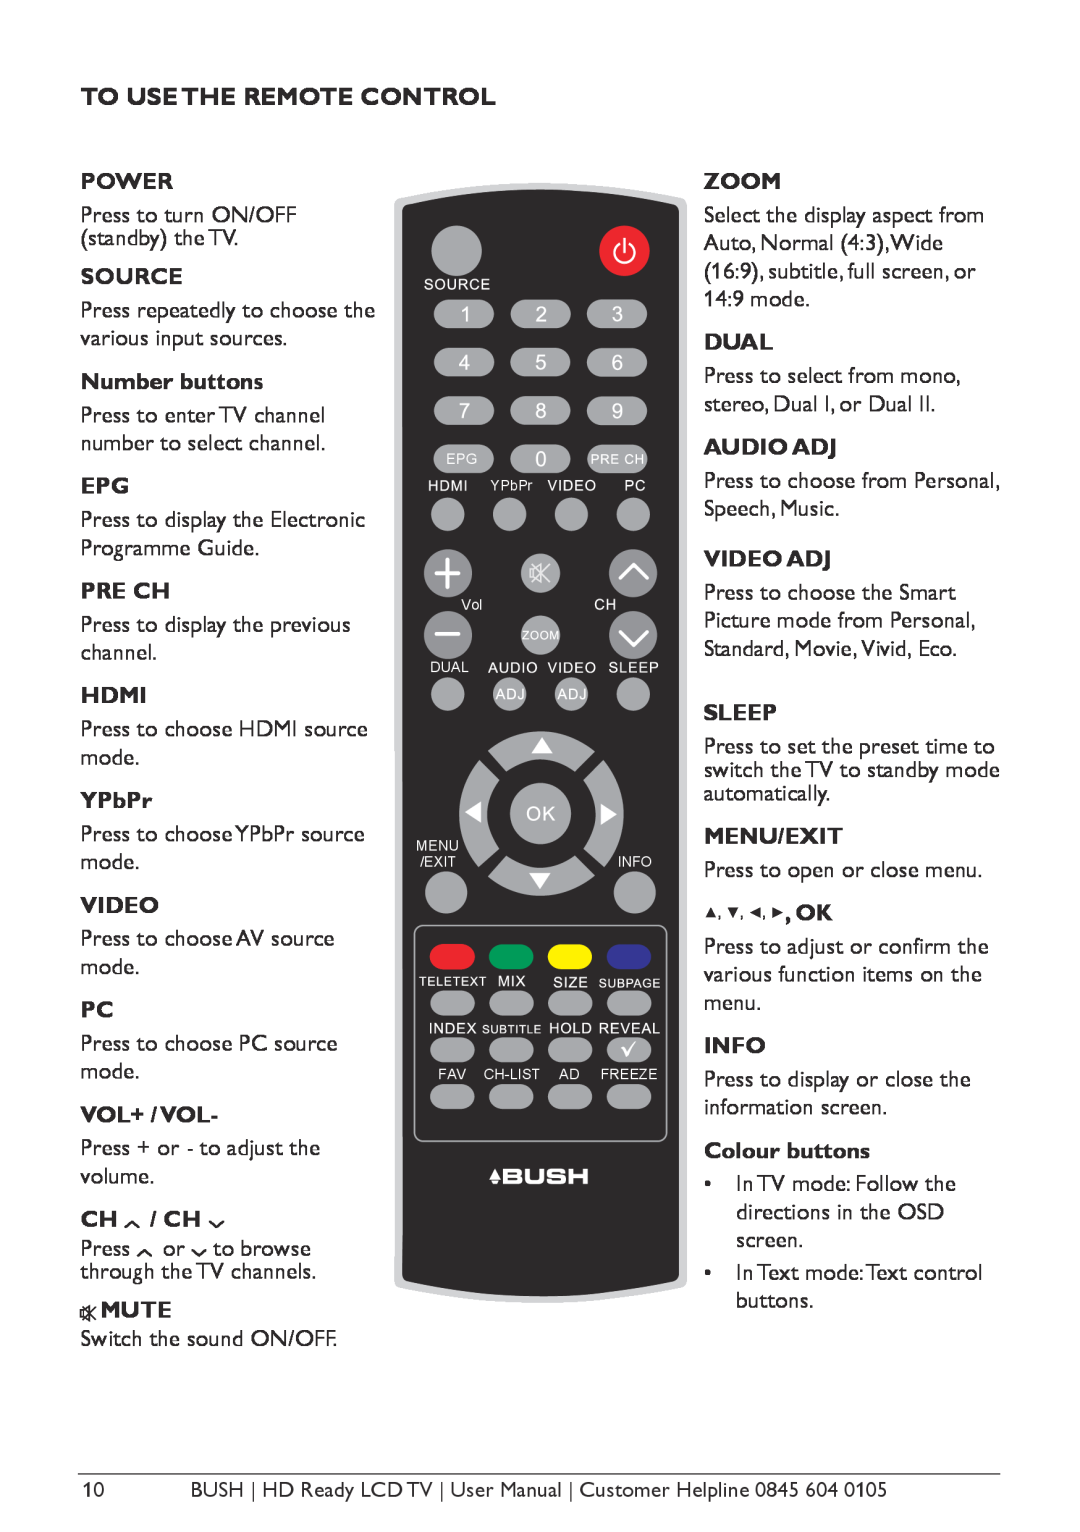 Bush Aseries, A6 To Use The Remote Control, Power, Source, Number buttons, Pre Ch, Zoom, Dual, Audio Adj, Video Adj, Hdmi 